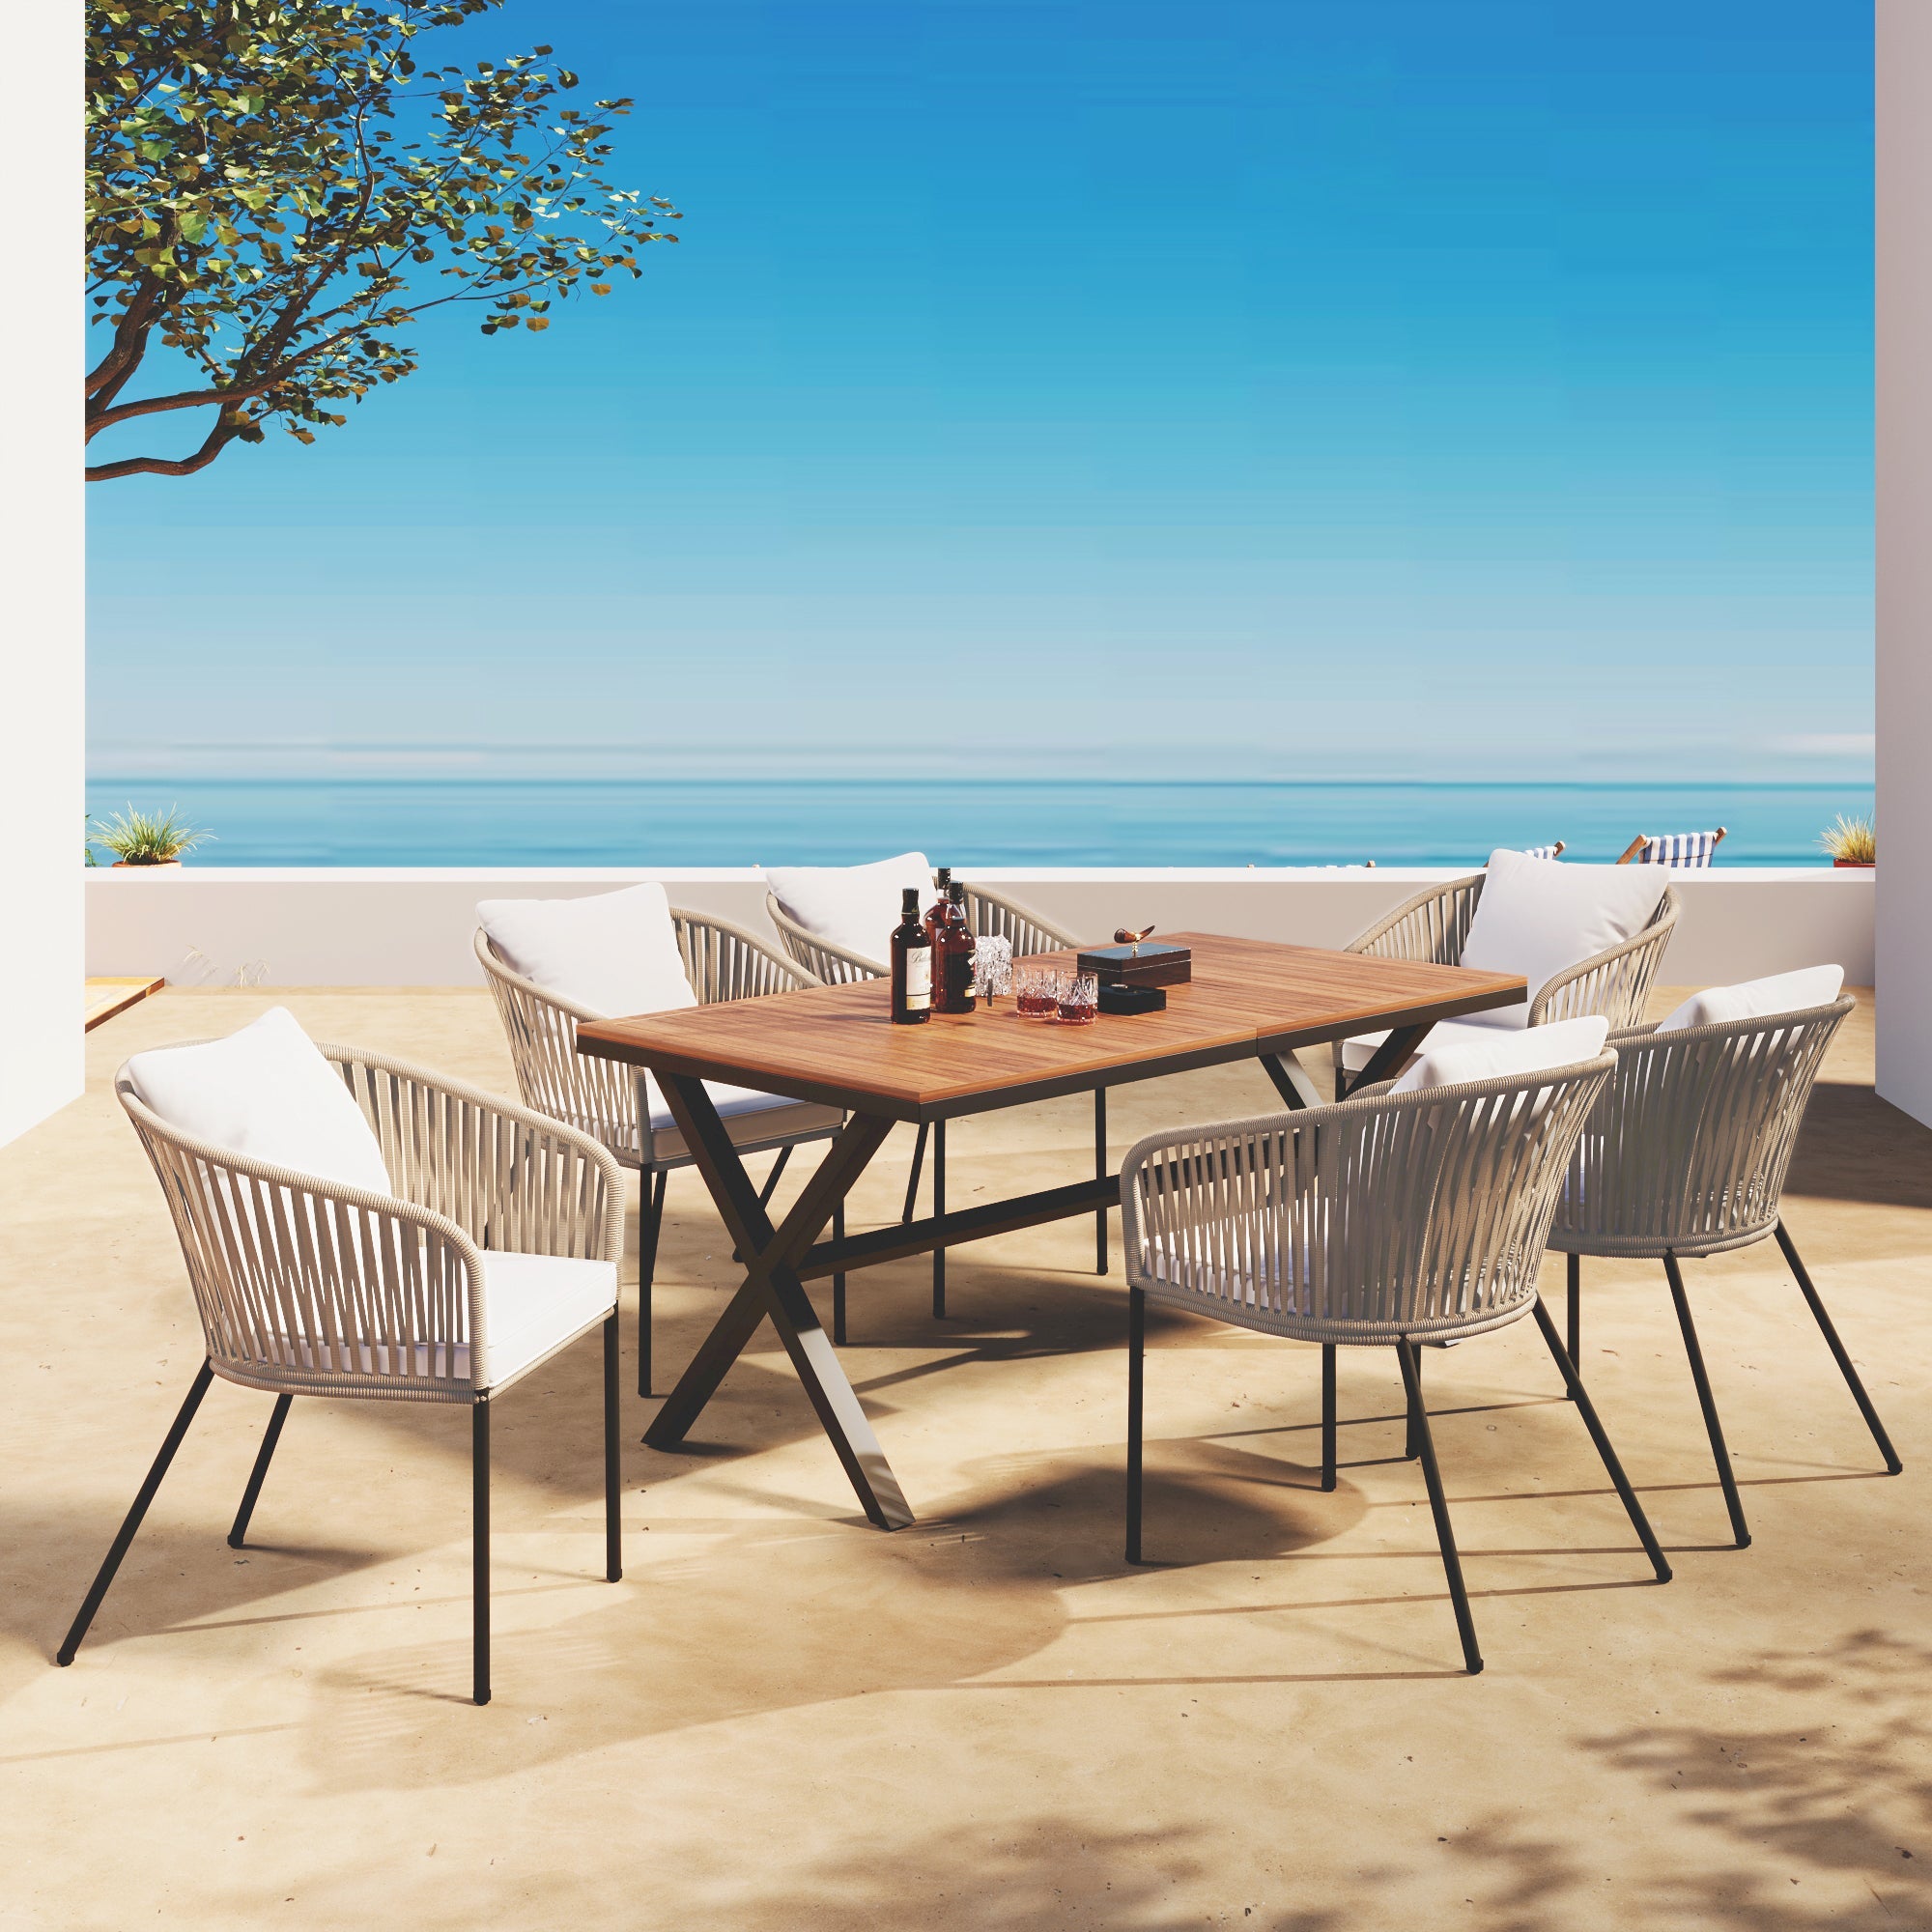 7 Pieces Patio Dining Set, All-Weather Outdoor Furniture Set with